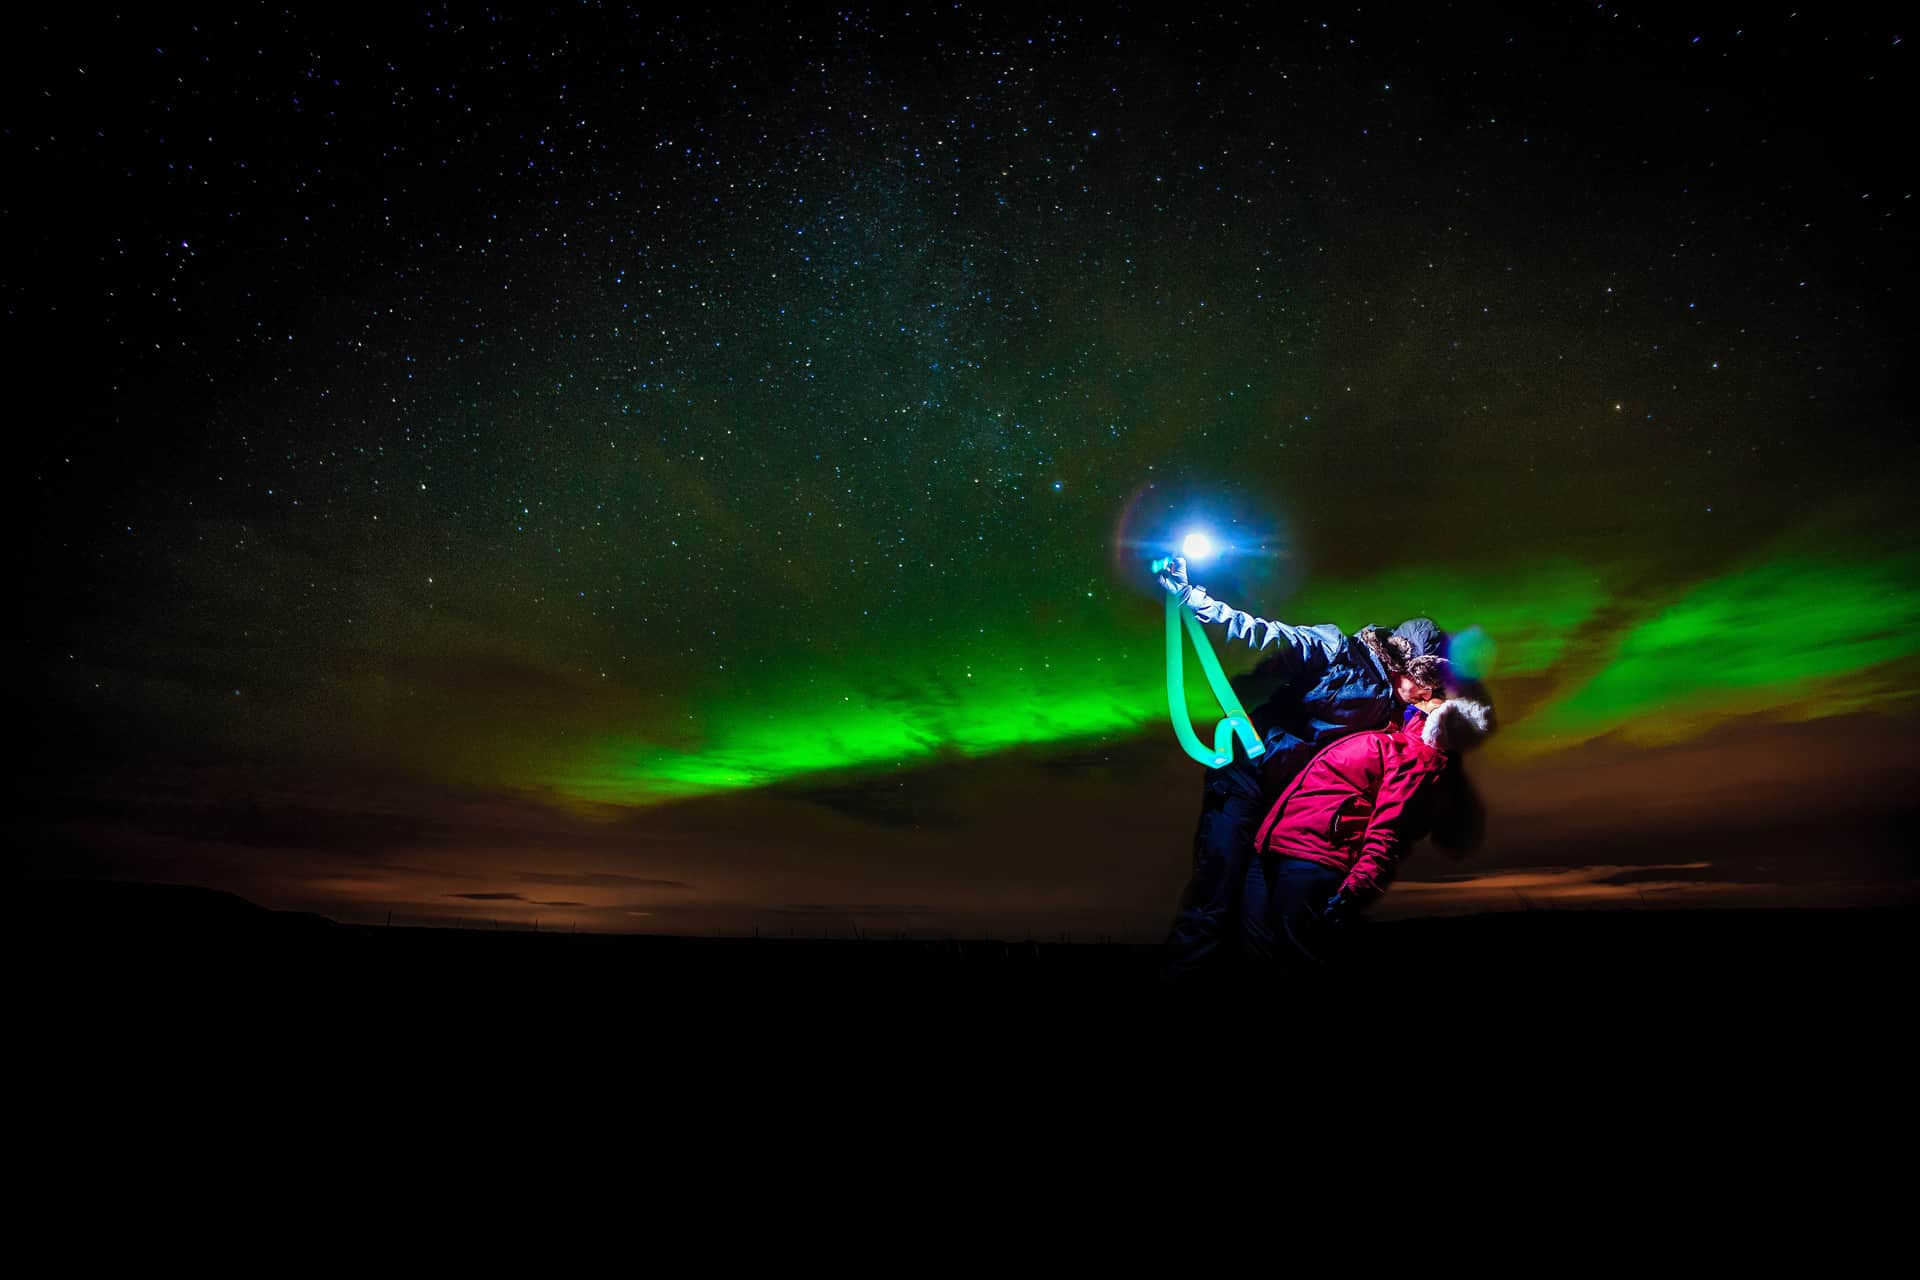 Couple embraces underneath the green northern lights in south Iceland.